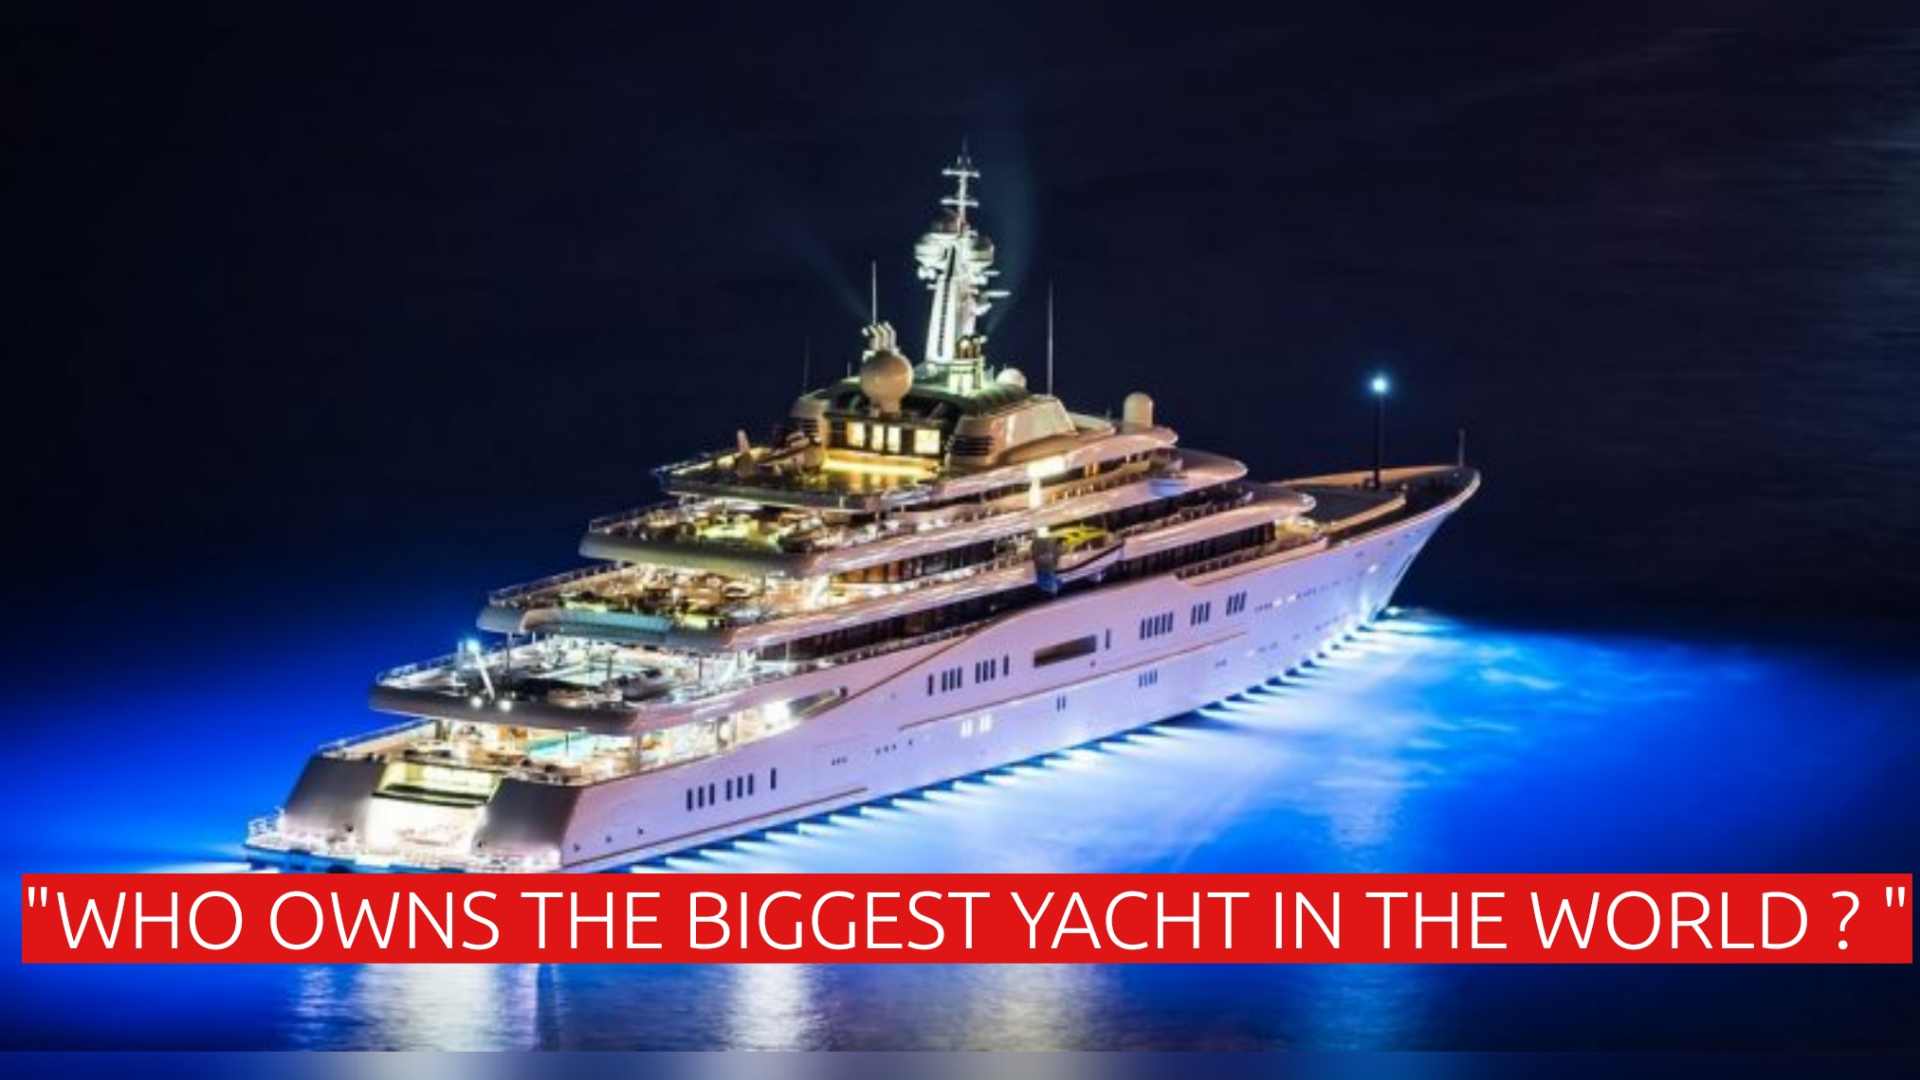 2nd biggest yacht in the world